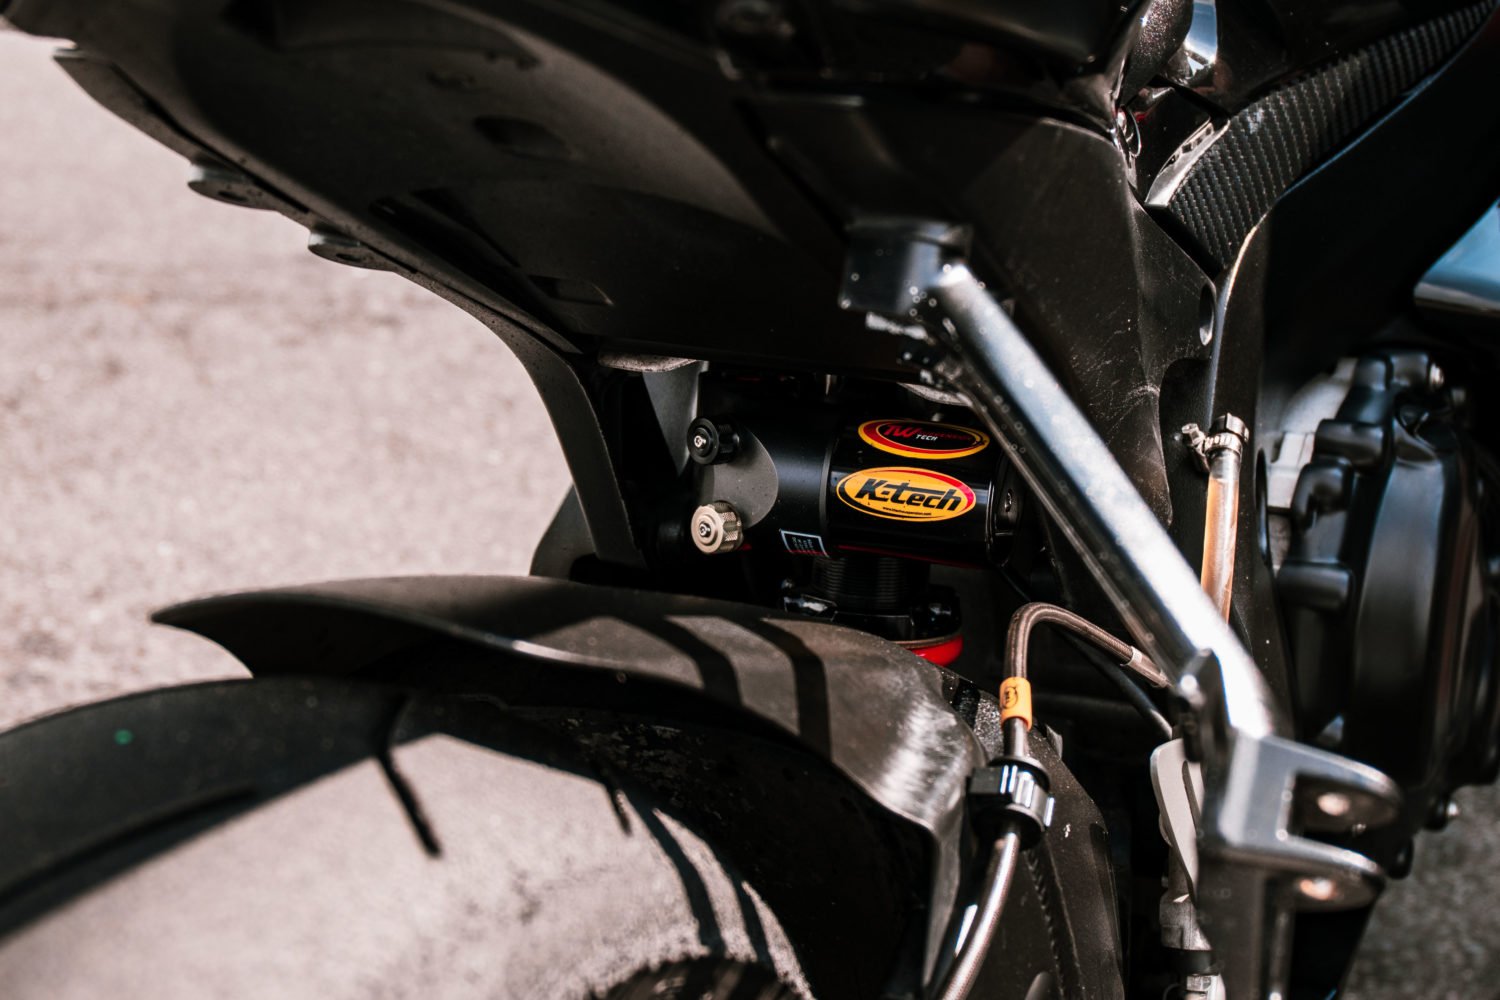 K-Tech Suspension review – 1 year on